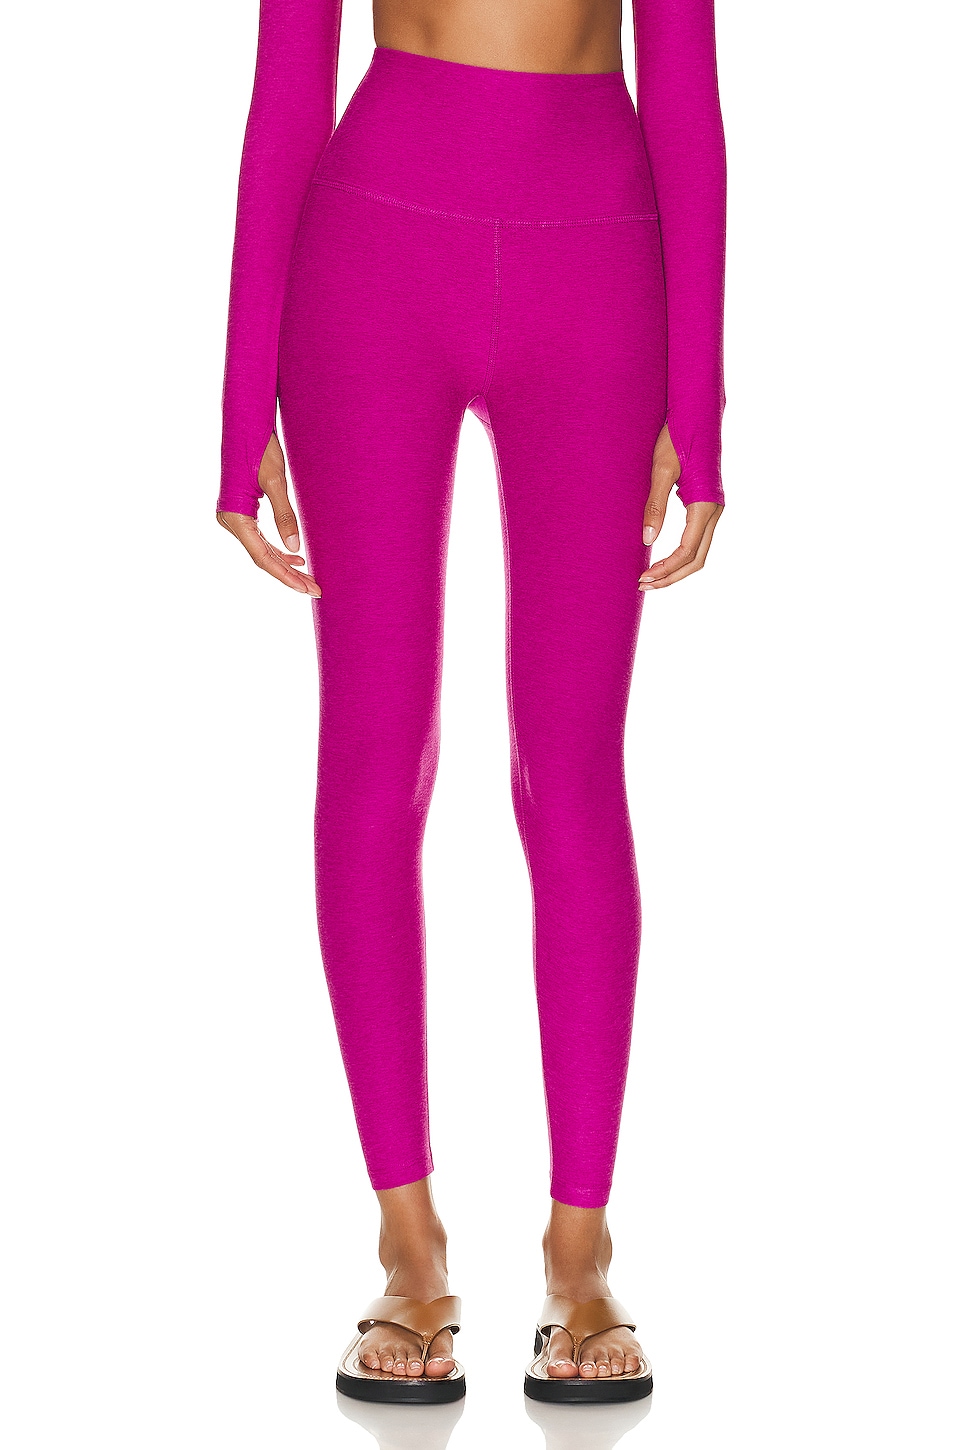 Image 1 of Beyond Yoga Spacedye Caught In The Midi High Waisted Legging in Magenta Heather